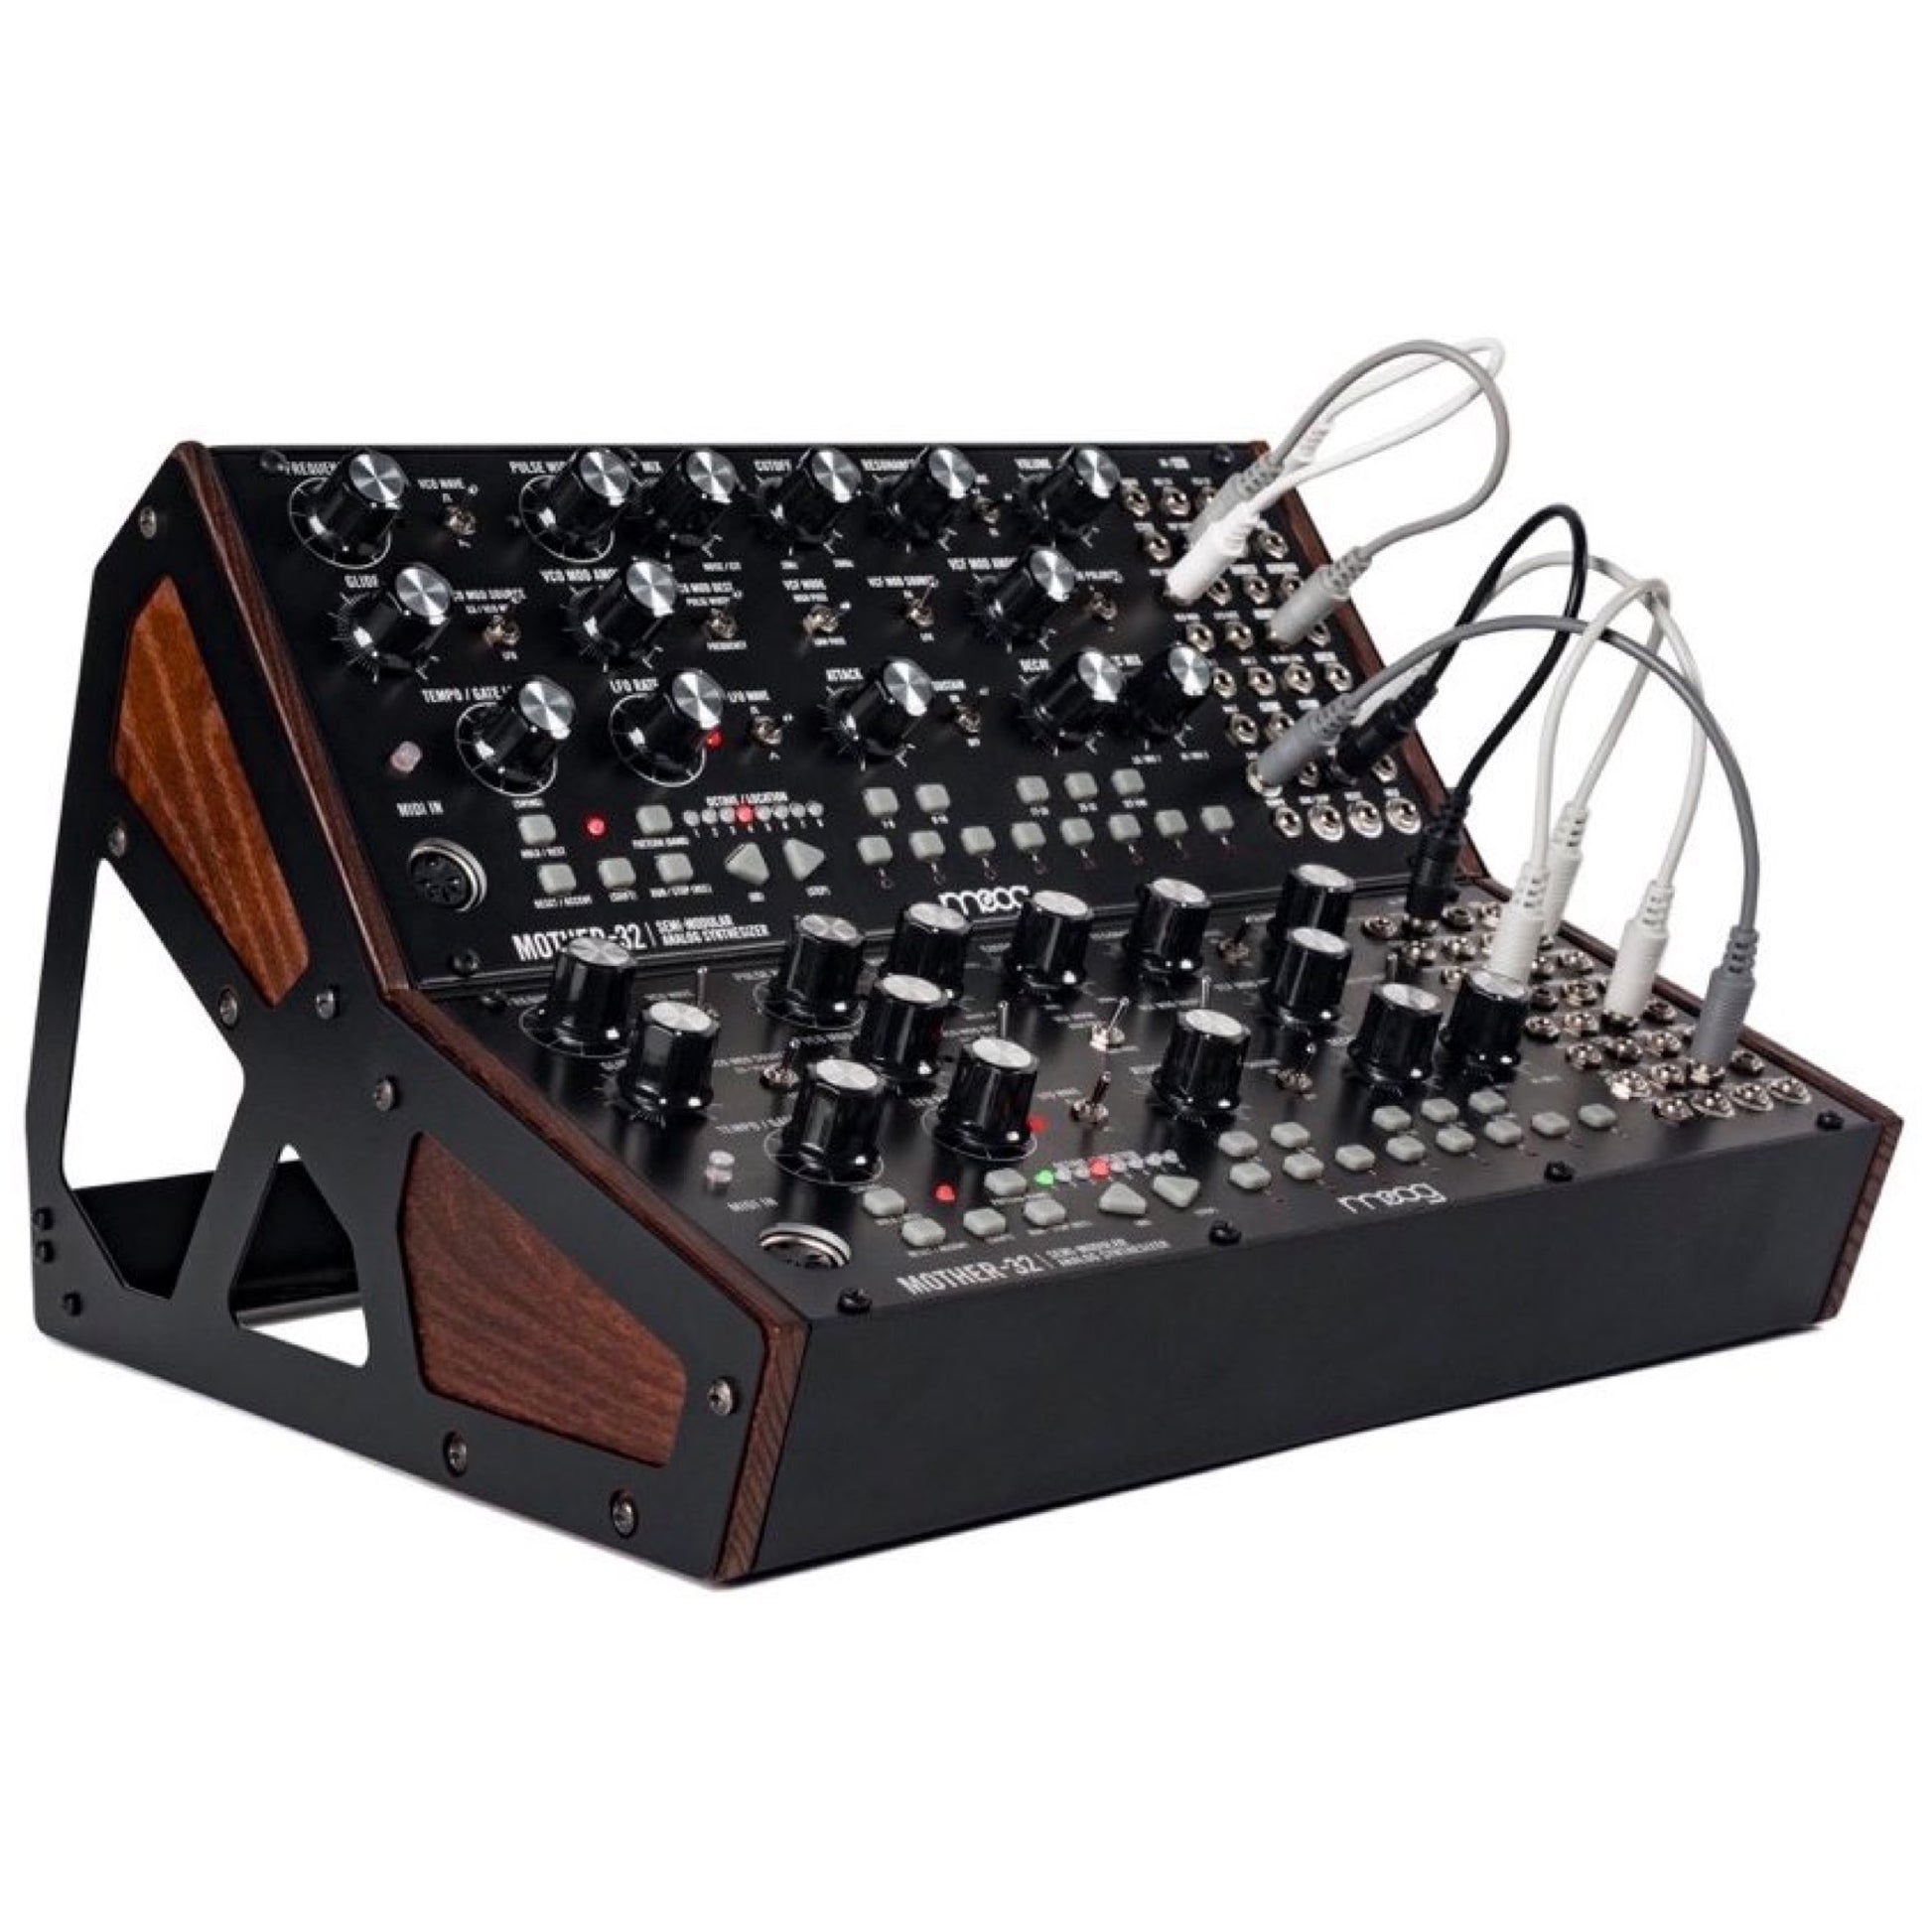 Moog 2-Tier Rack Kit for DFAM and Mother-32 Synthesizer